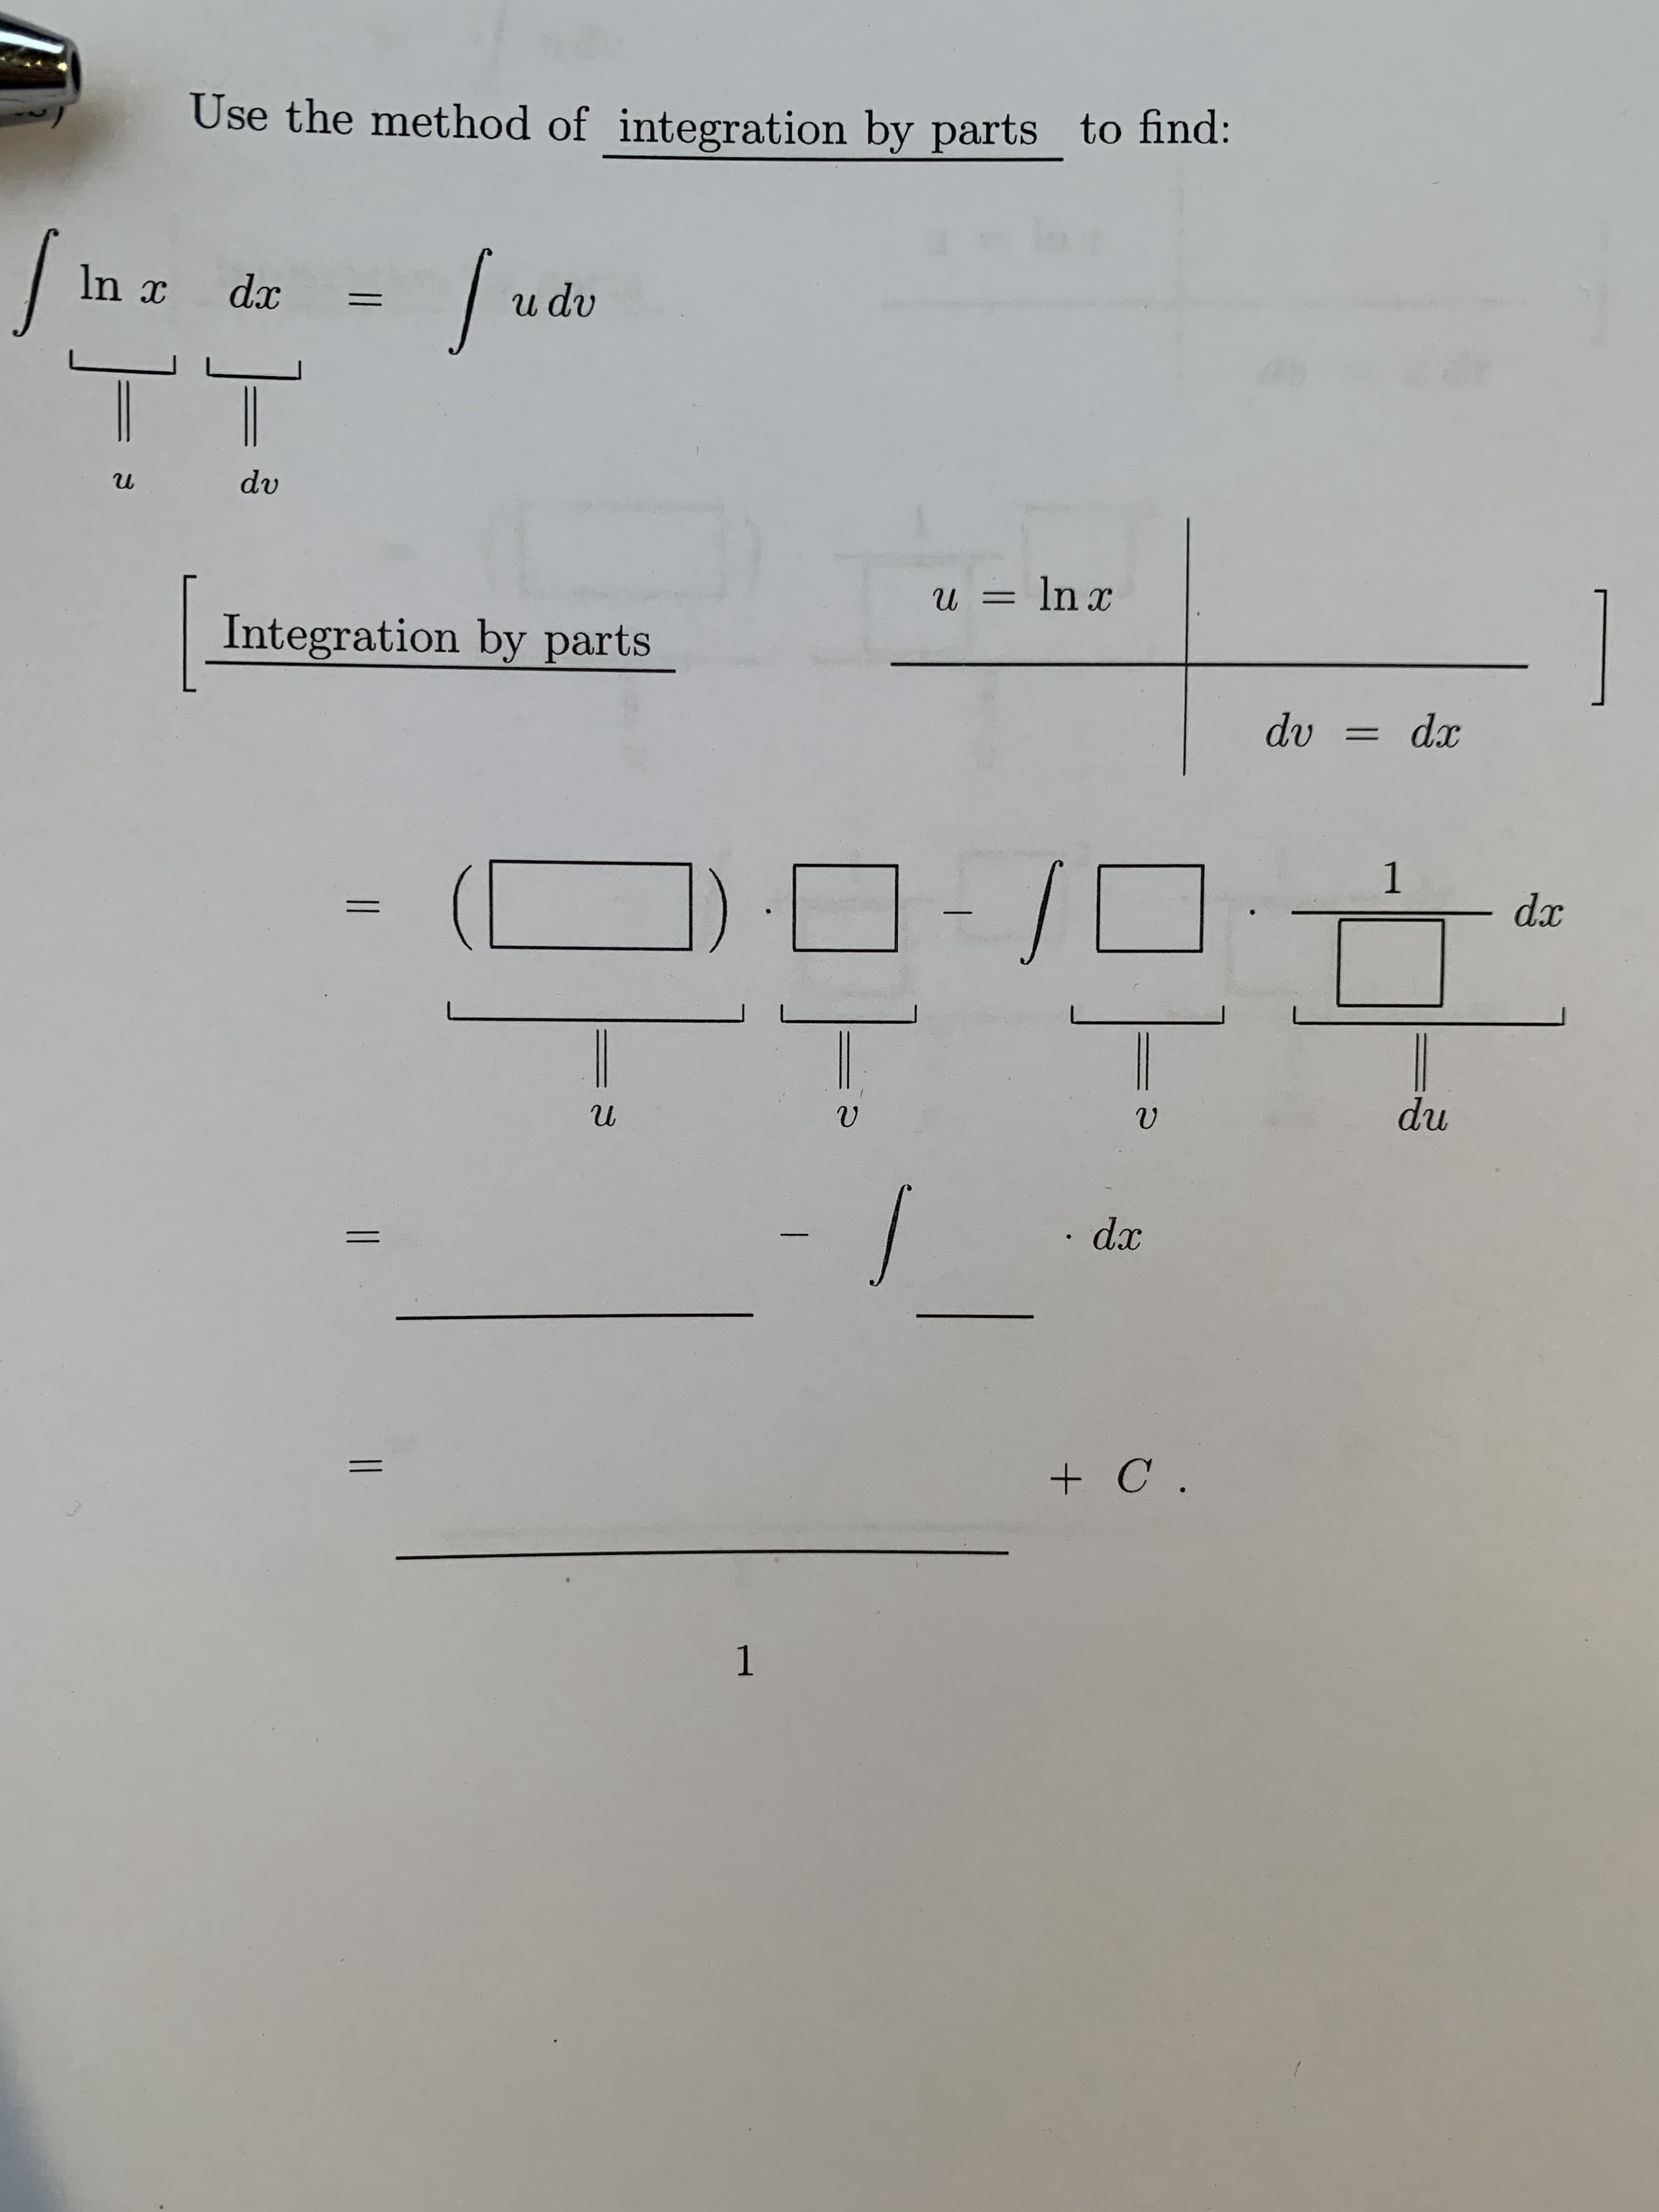 Use the method of integration by parts to find:
In x
dx
u dv
